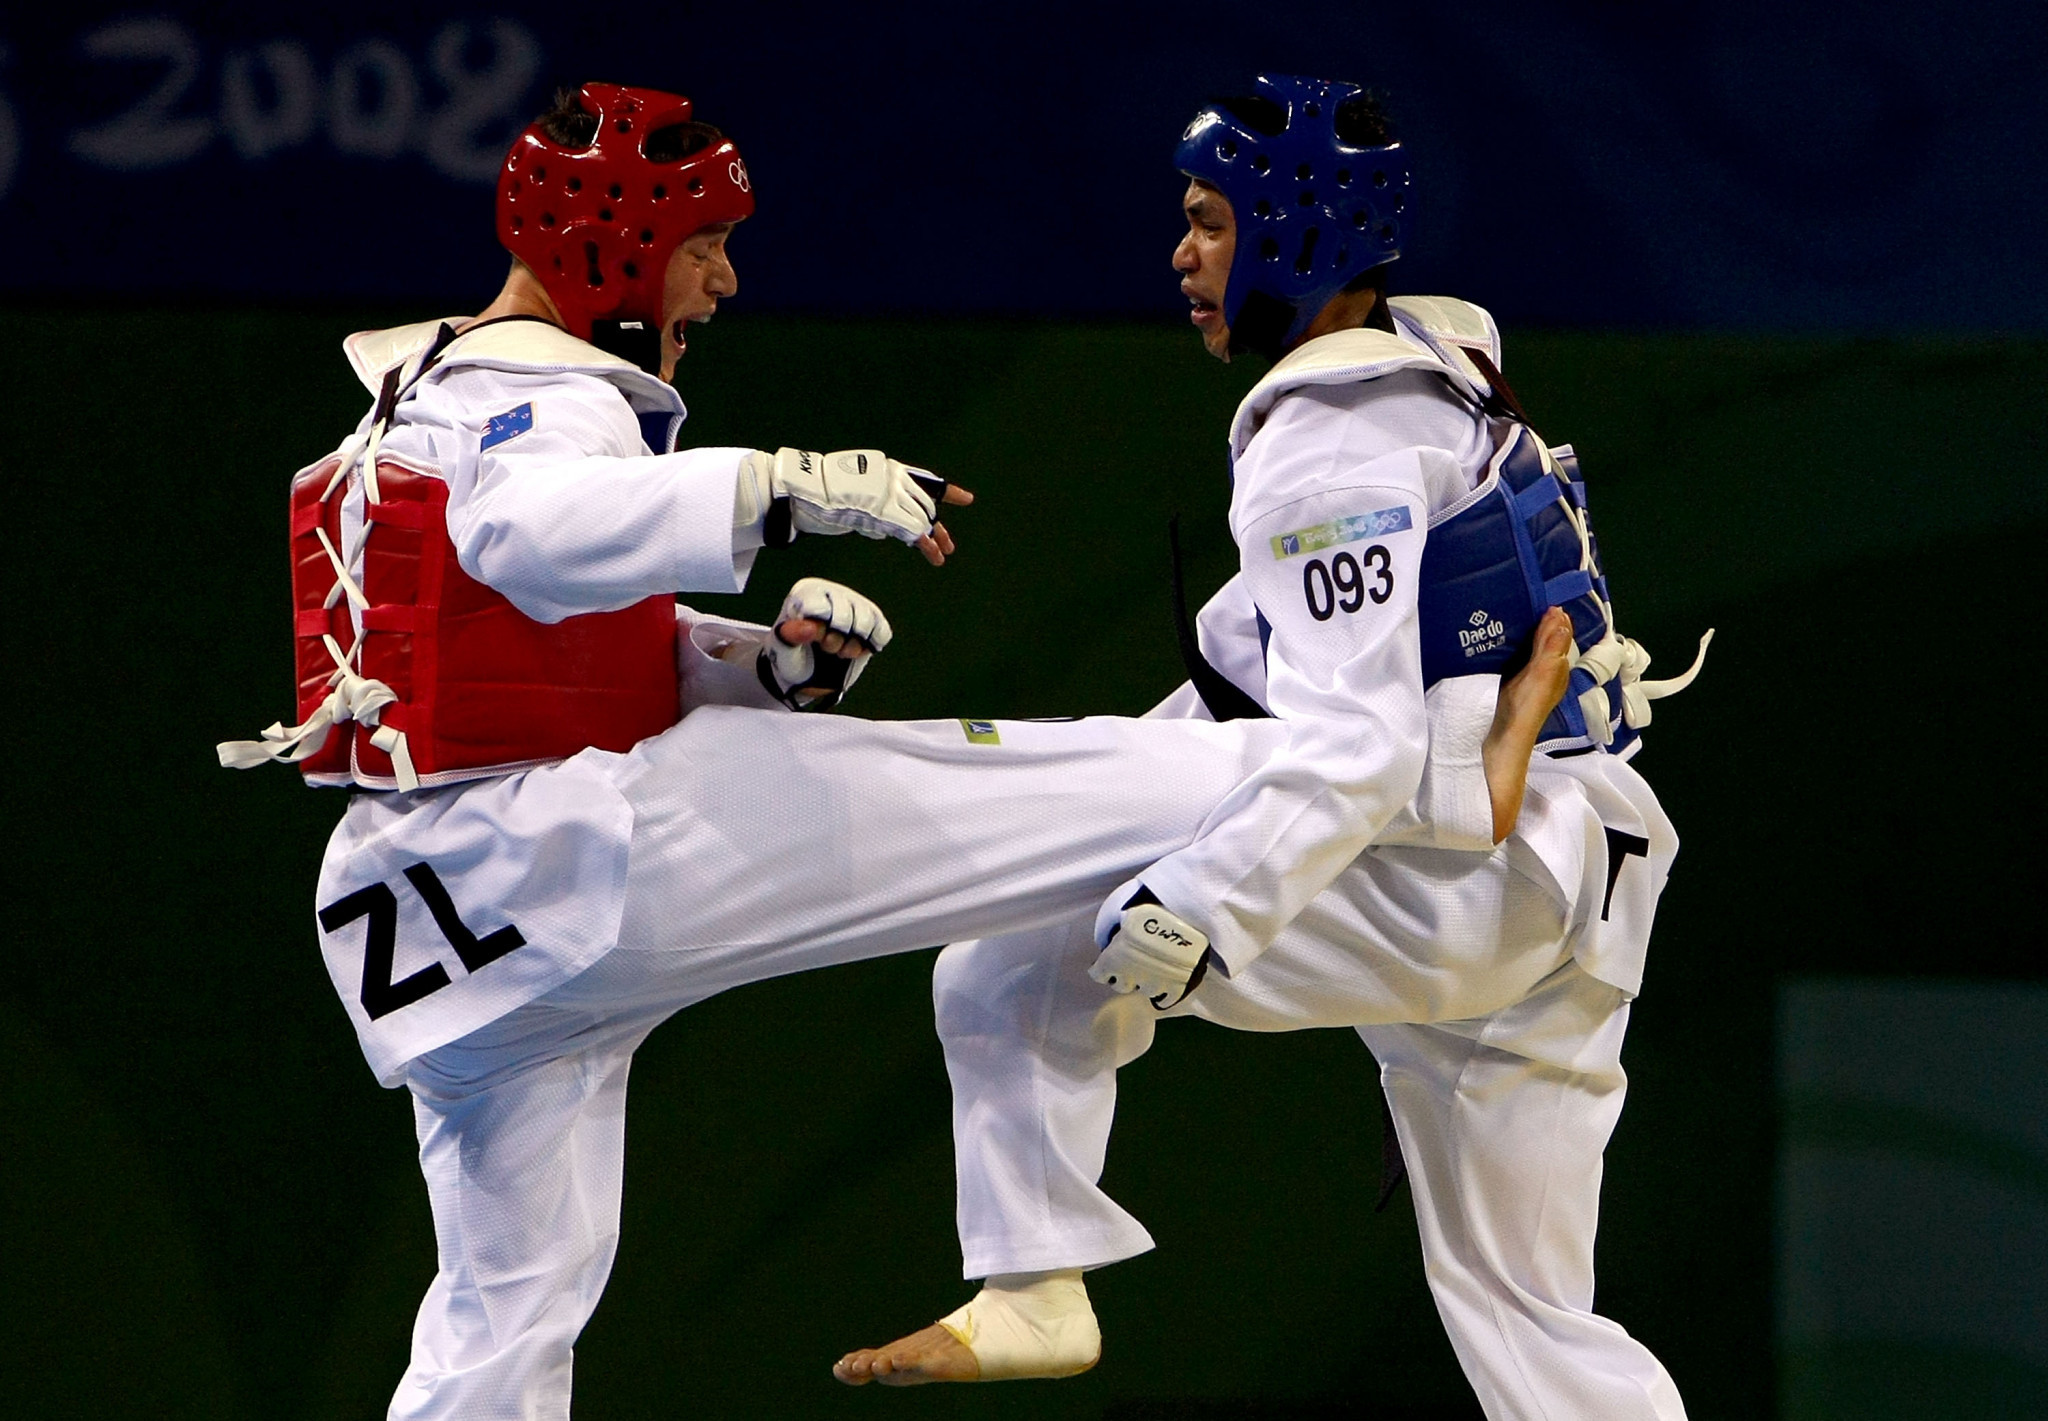 Taekwondo athletes in New Zealand suffer again because of governance disputes